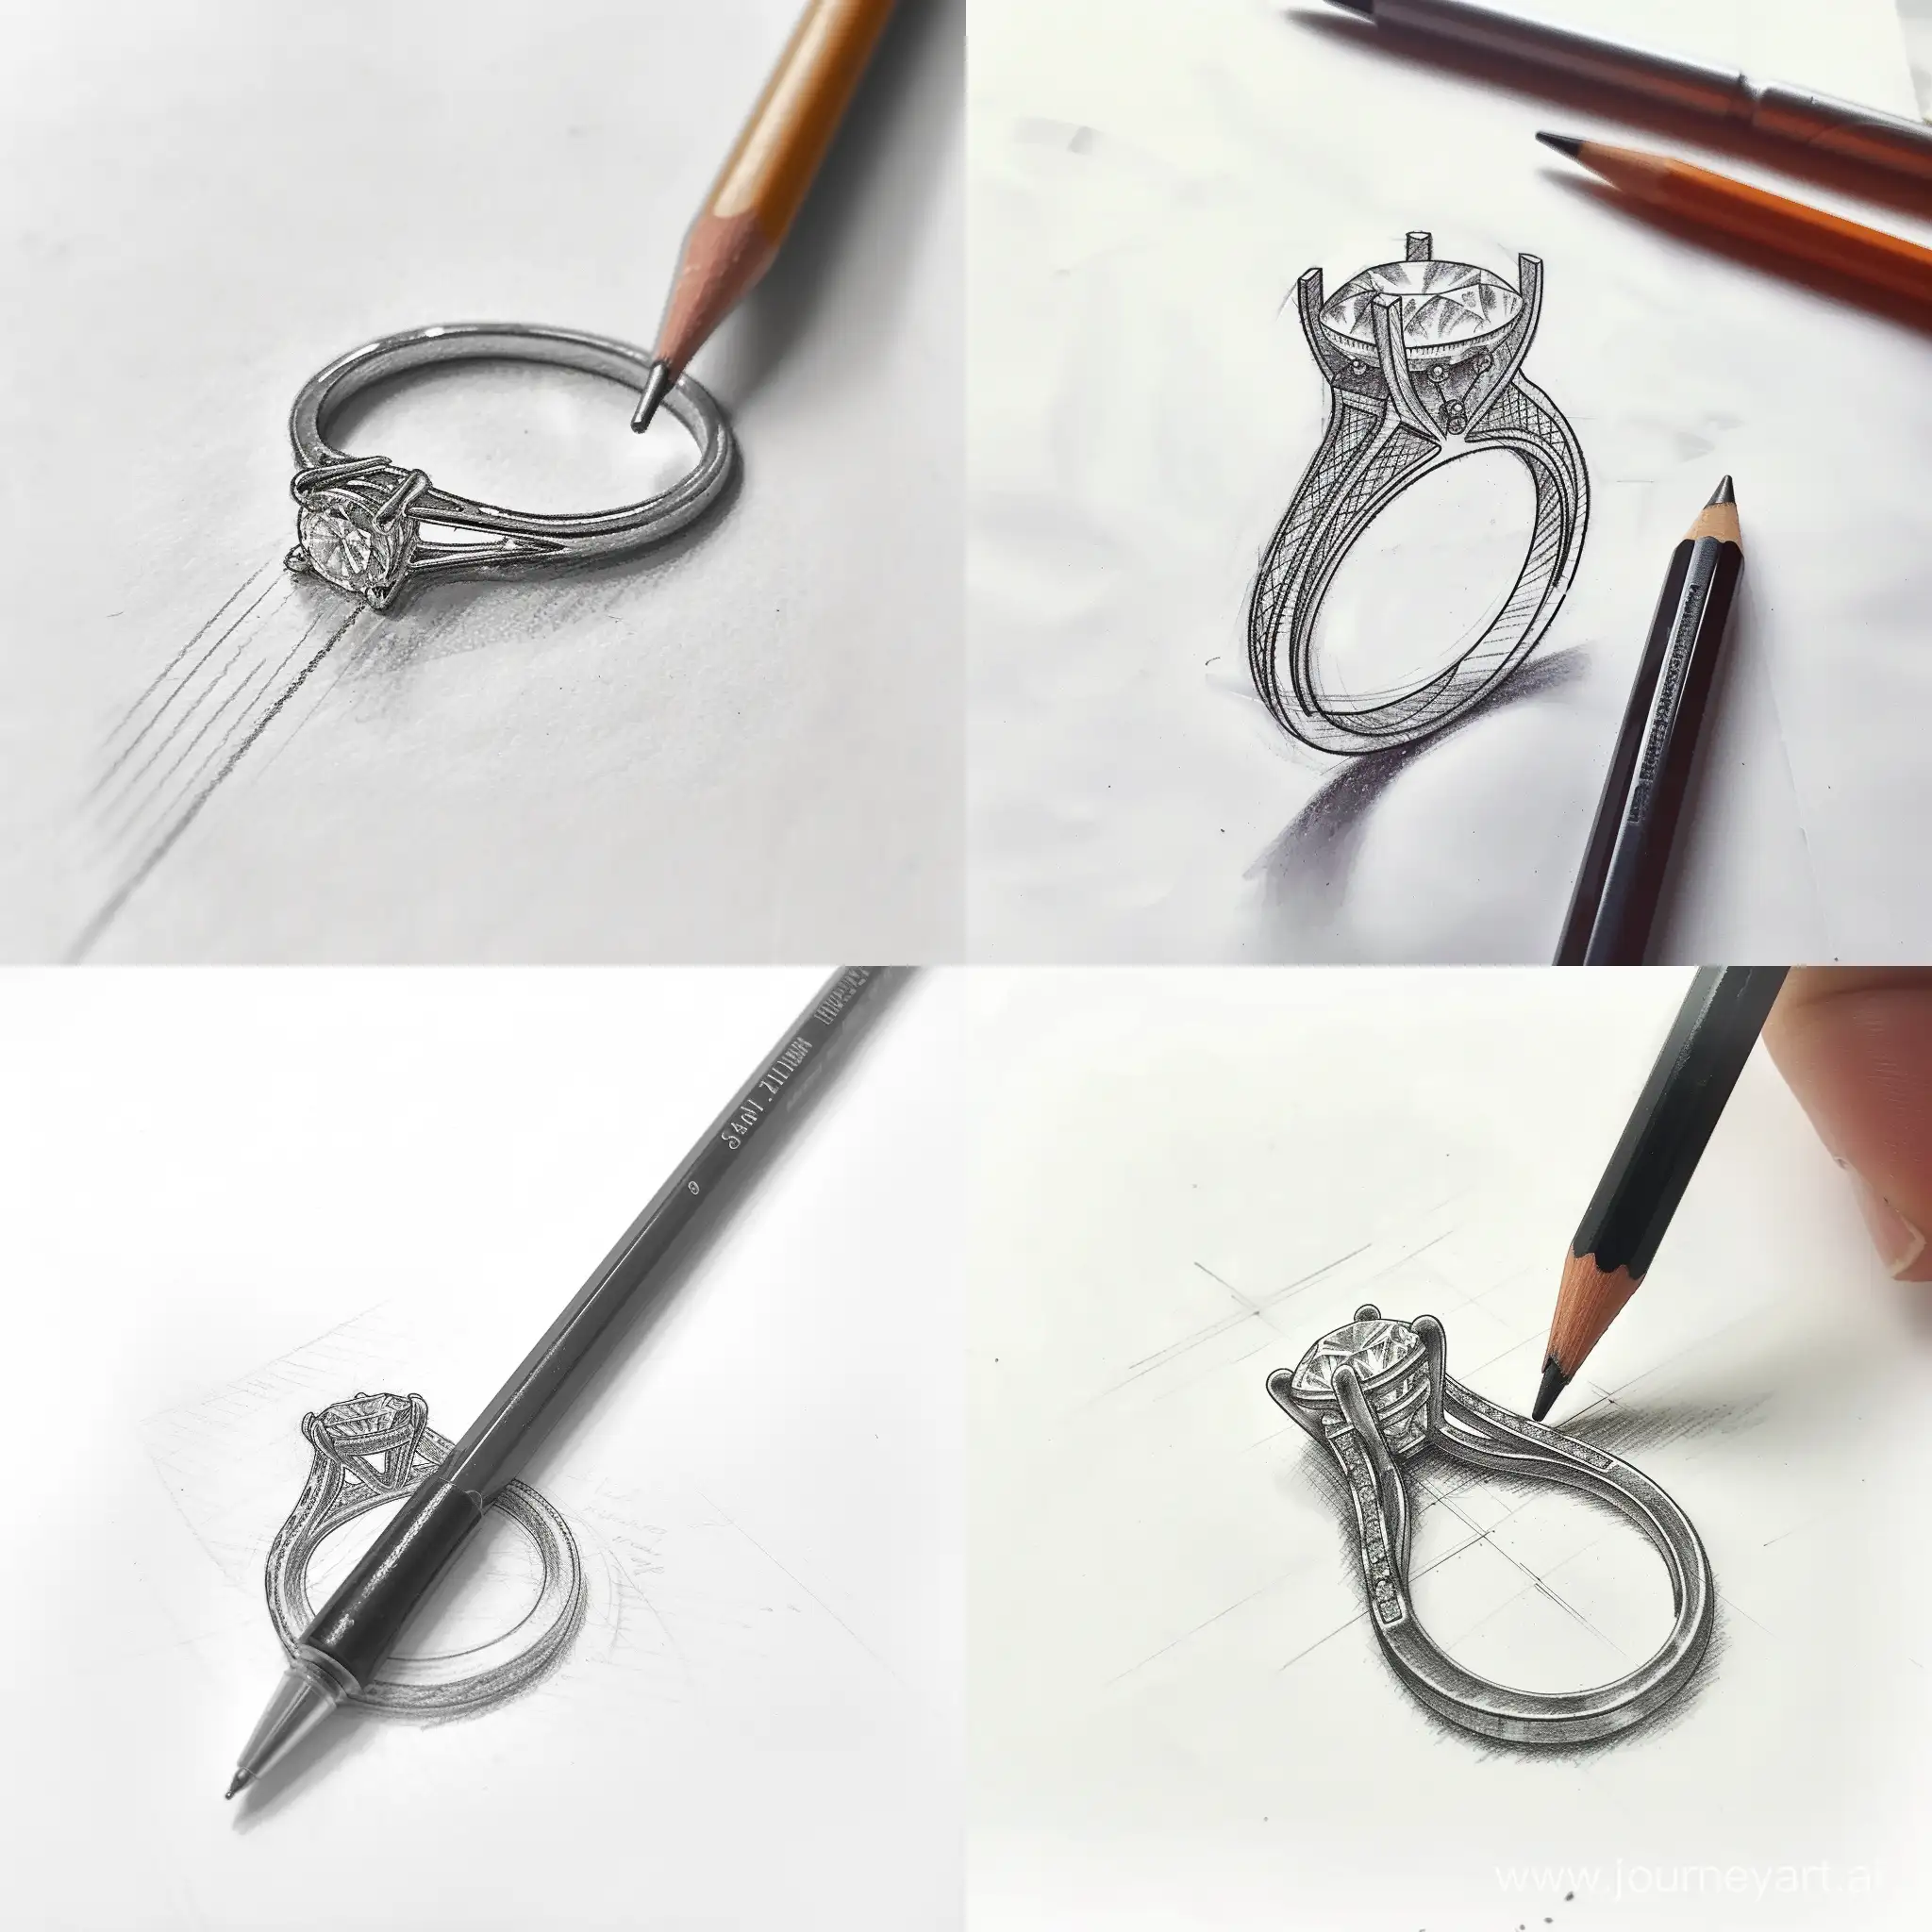 Natural pen Pencil cross hatch sketch drawing of ring design for girl friend